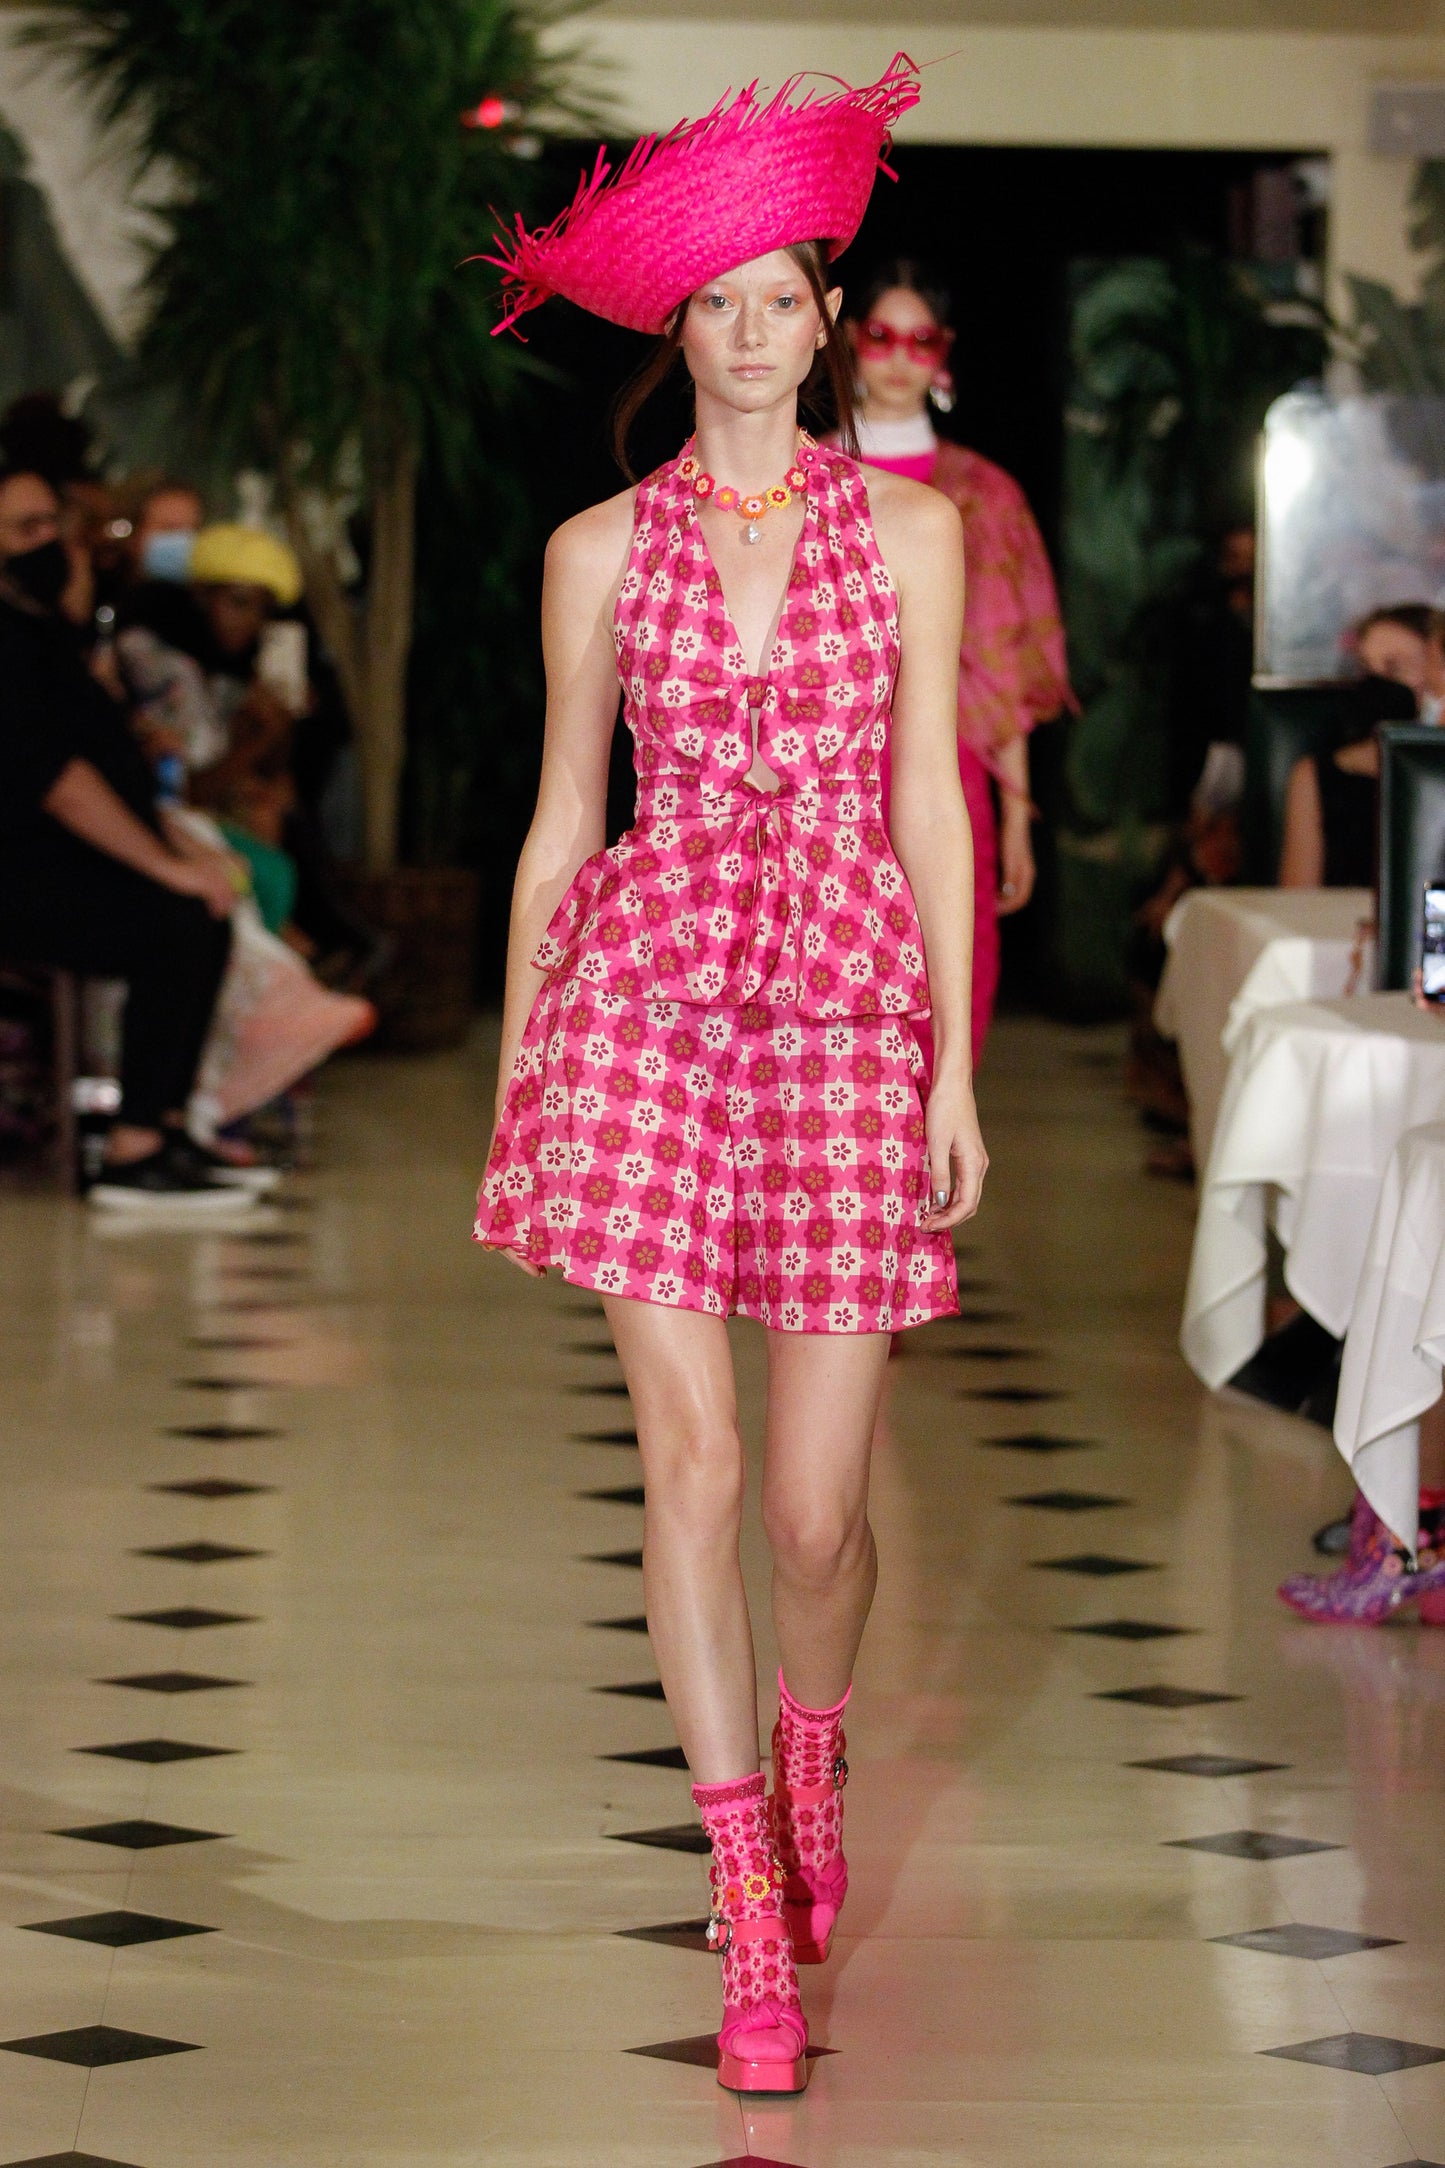 Under runway light, Utopian Gingham Halter Top Pink is a match with the Utopian Gingham Shorts